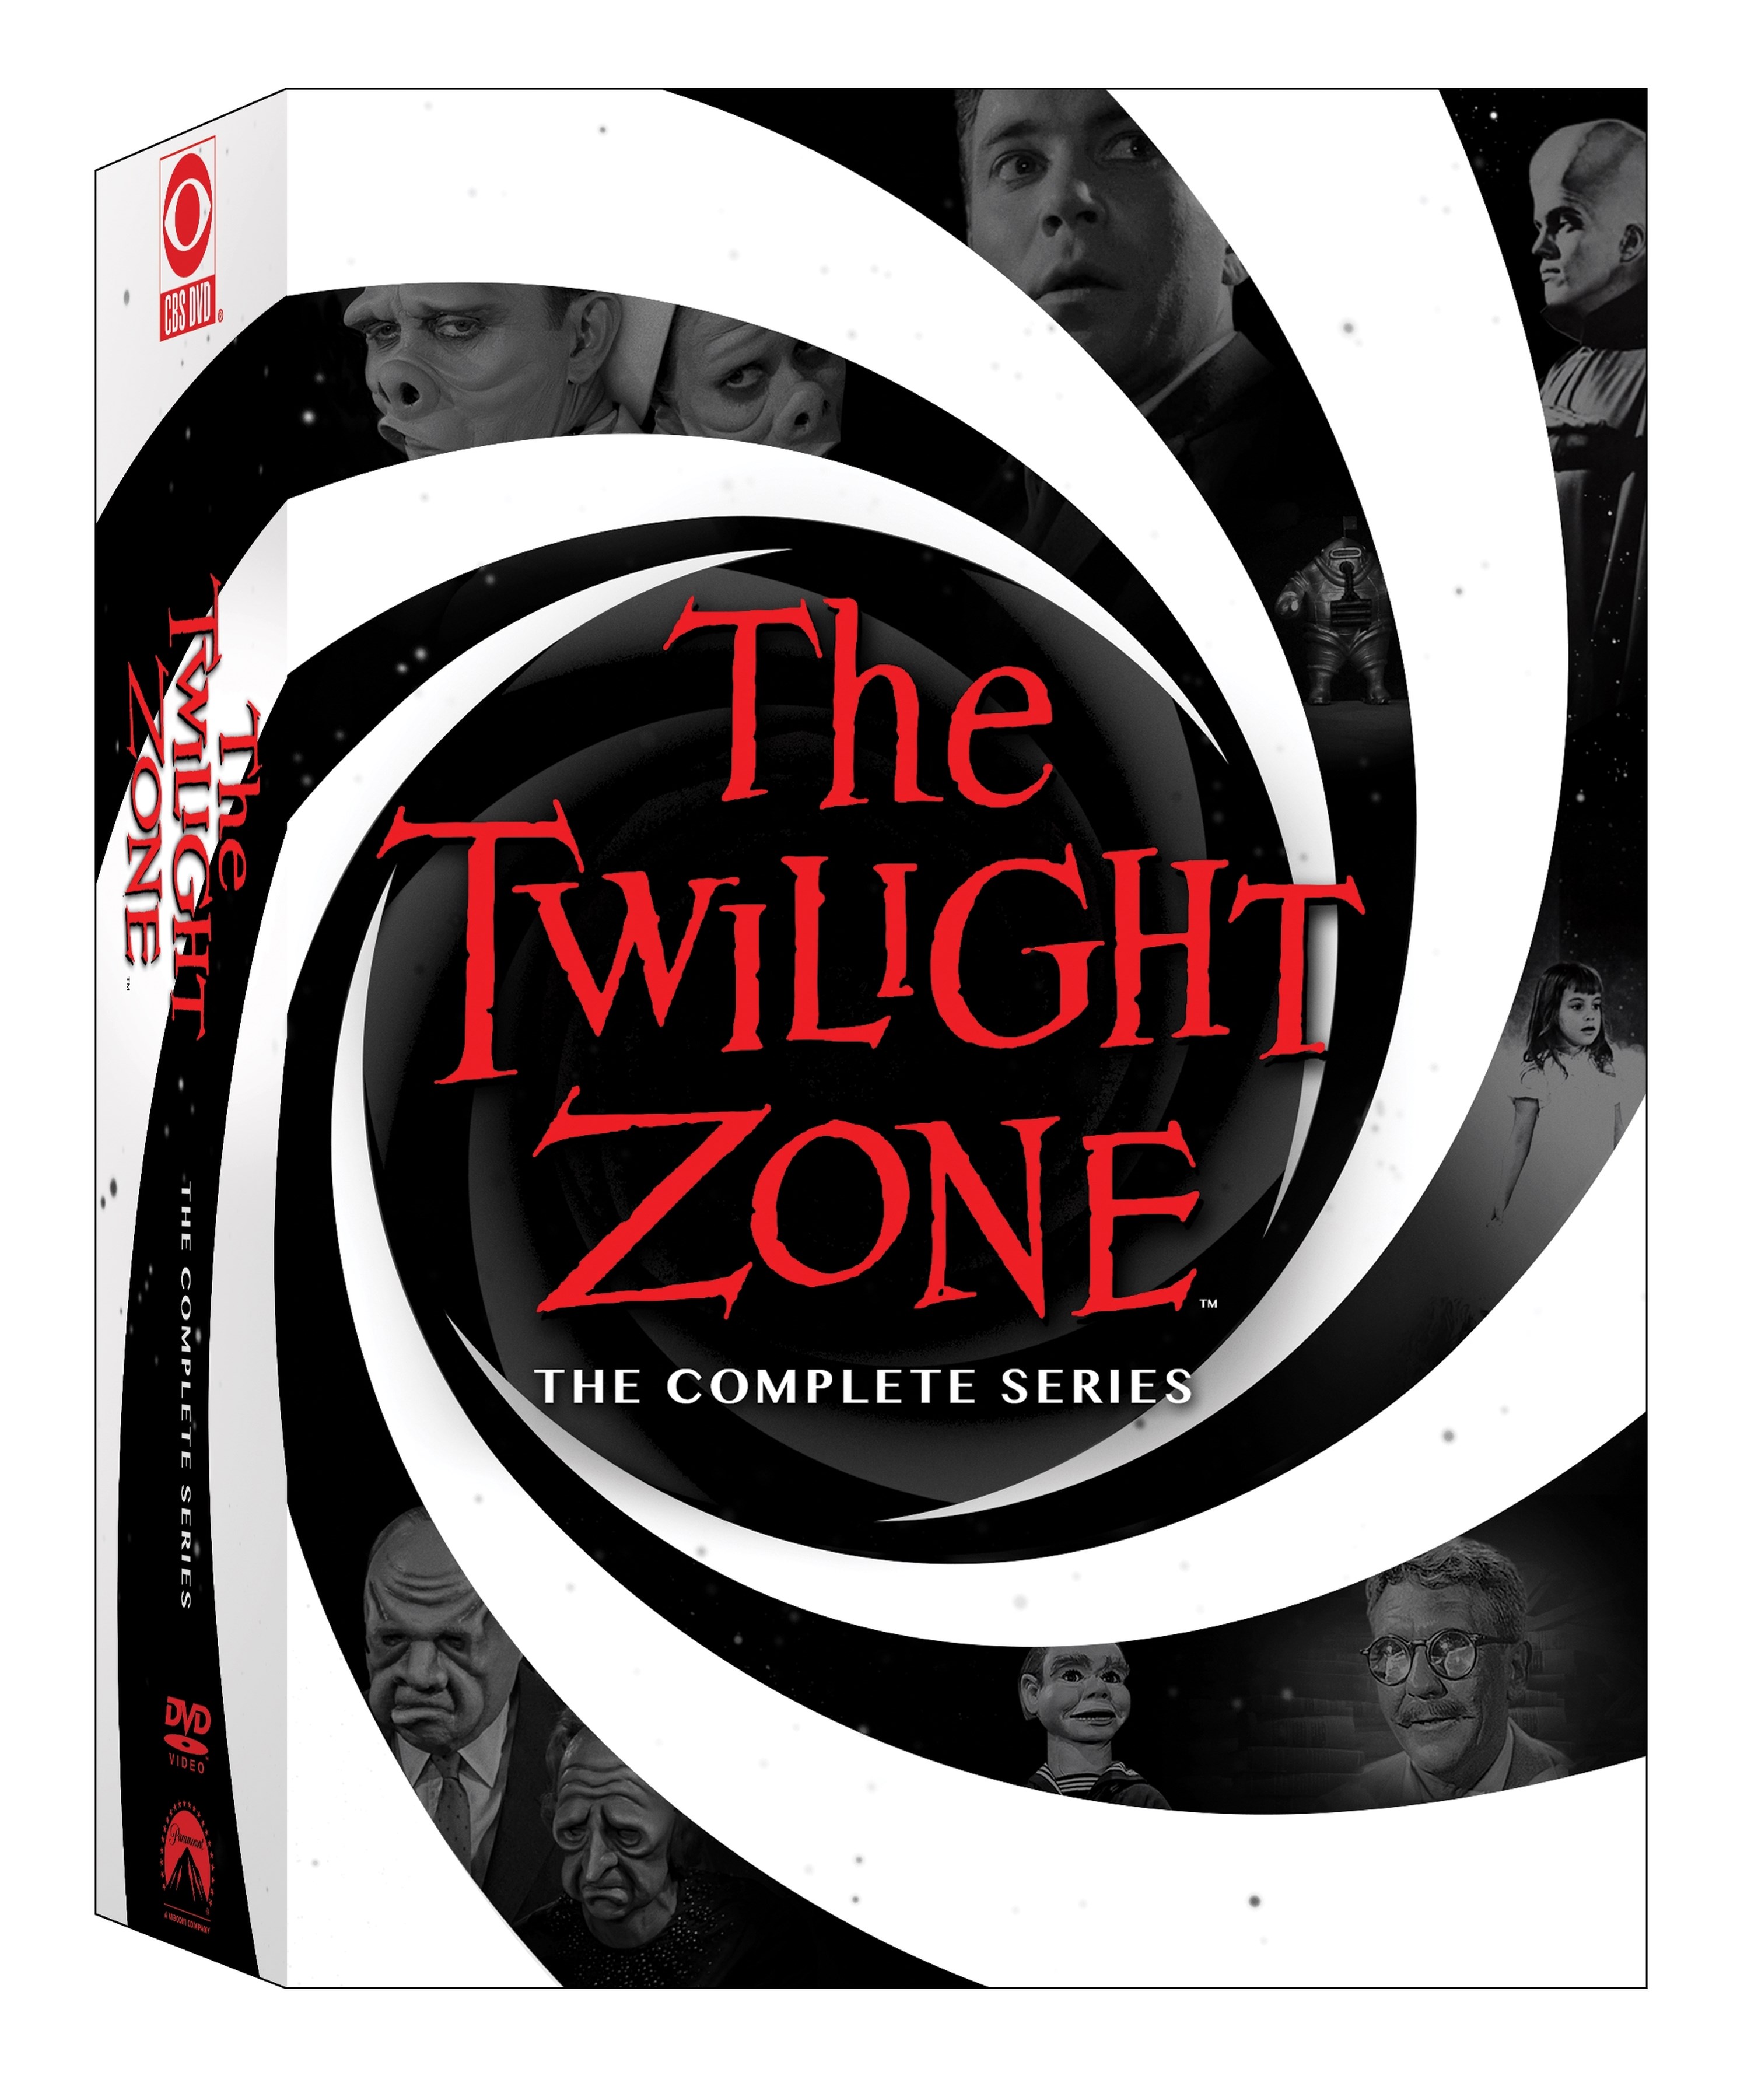 The Twilight Zone: The Complete Series (DVD) - image 2 of 2